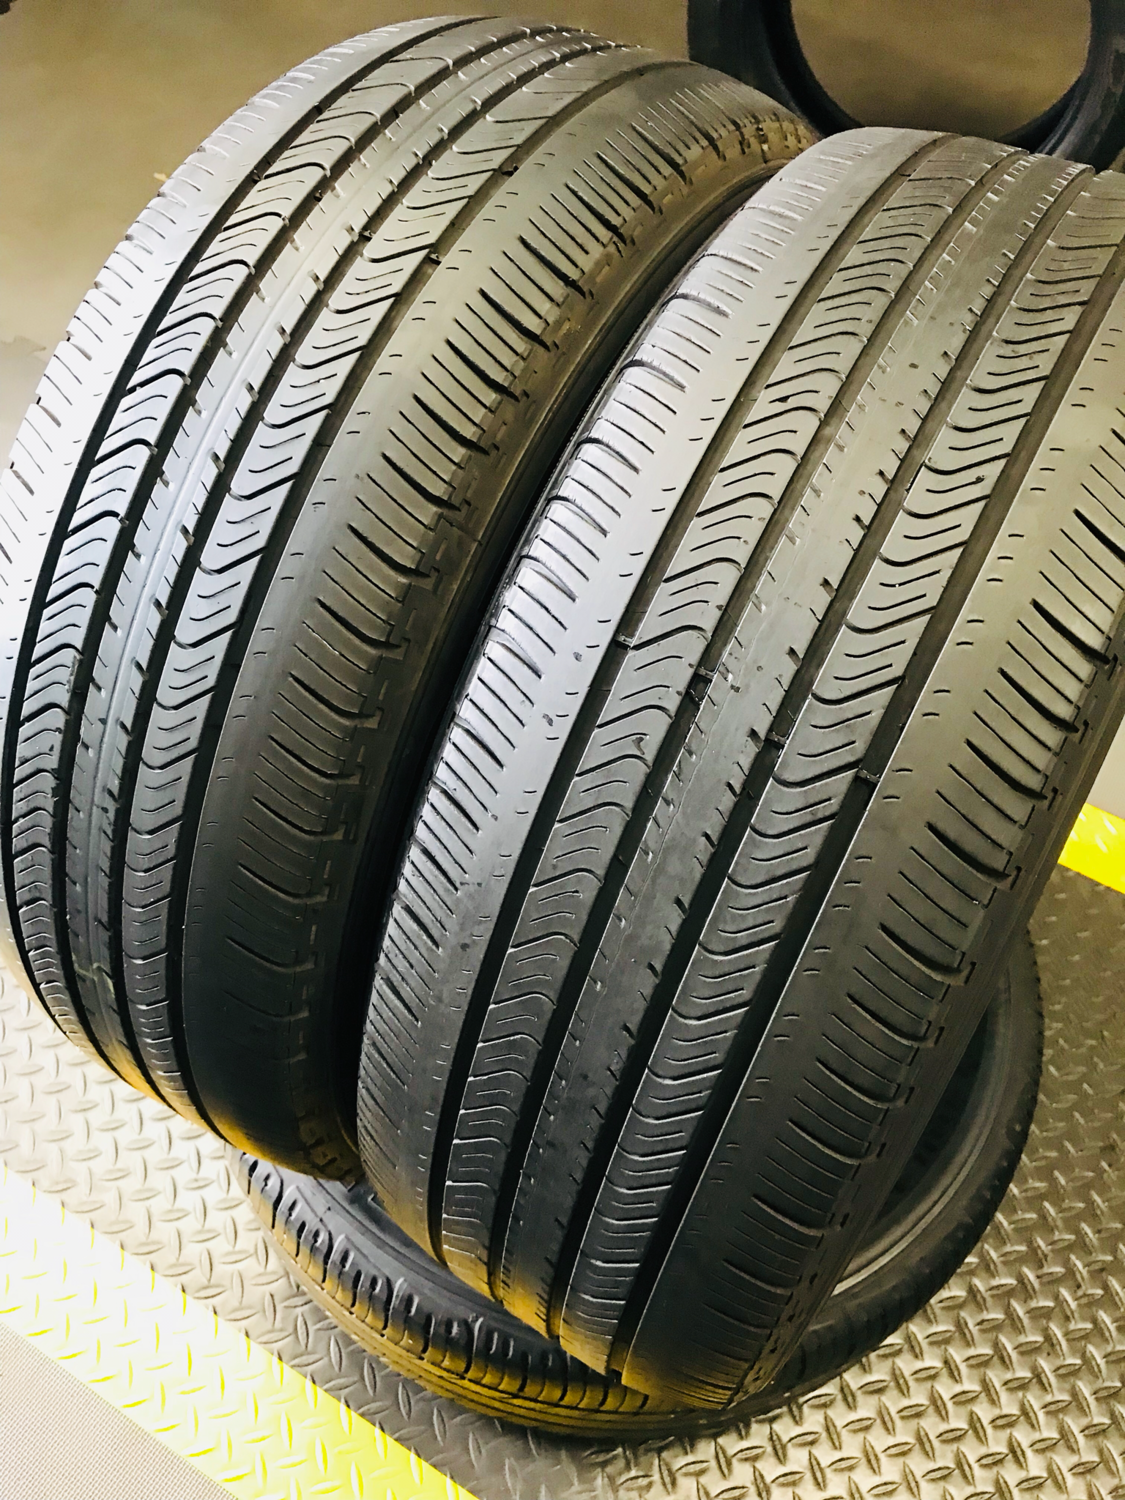 2-used-tires-215-55r17-michelin-primacy-mxv4-with-5-32